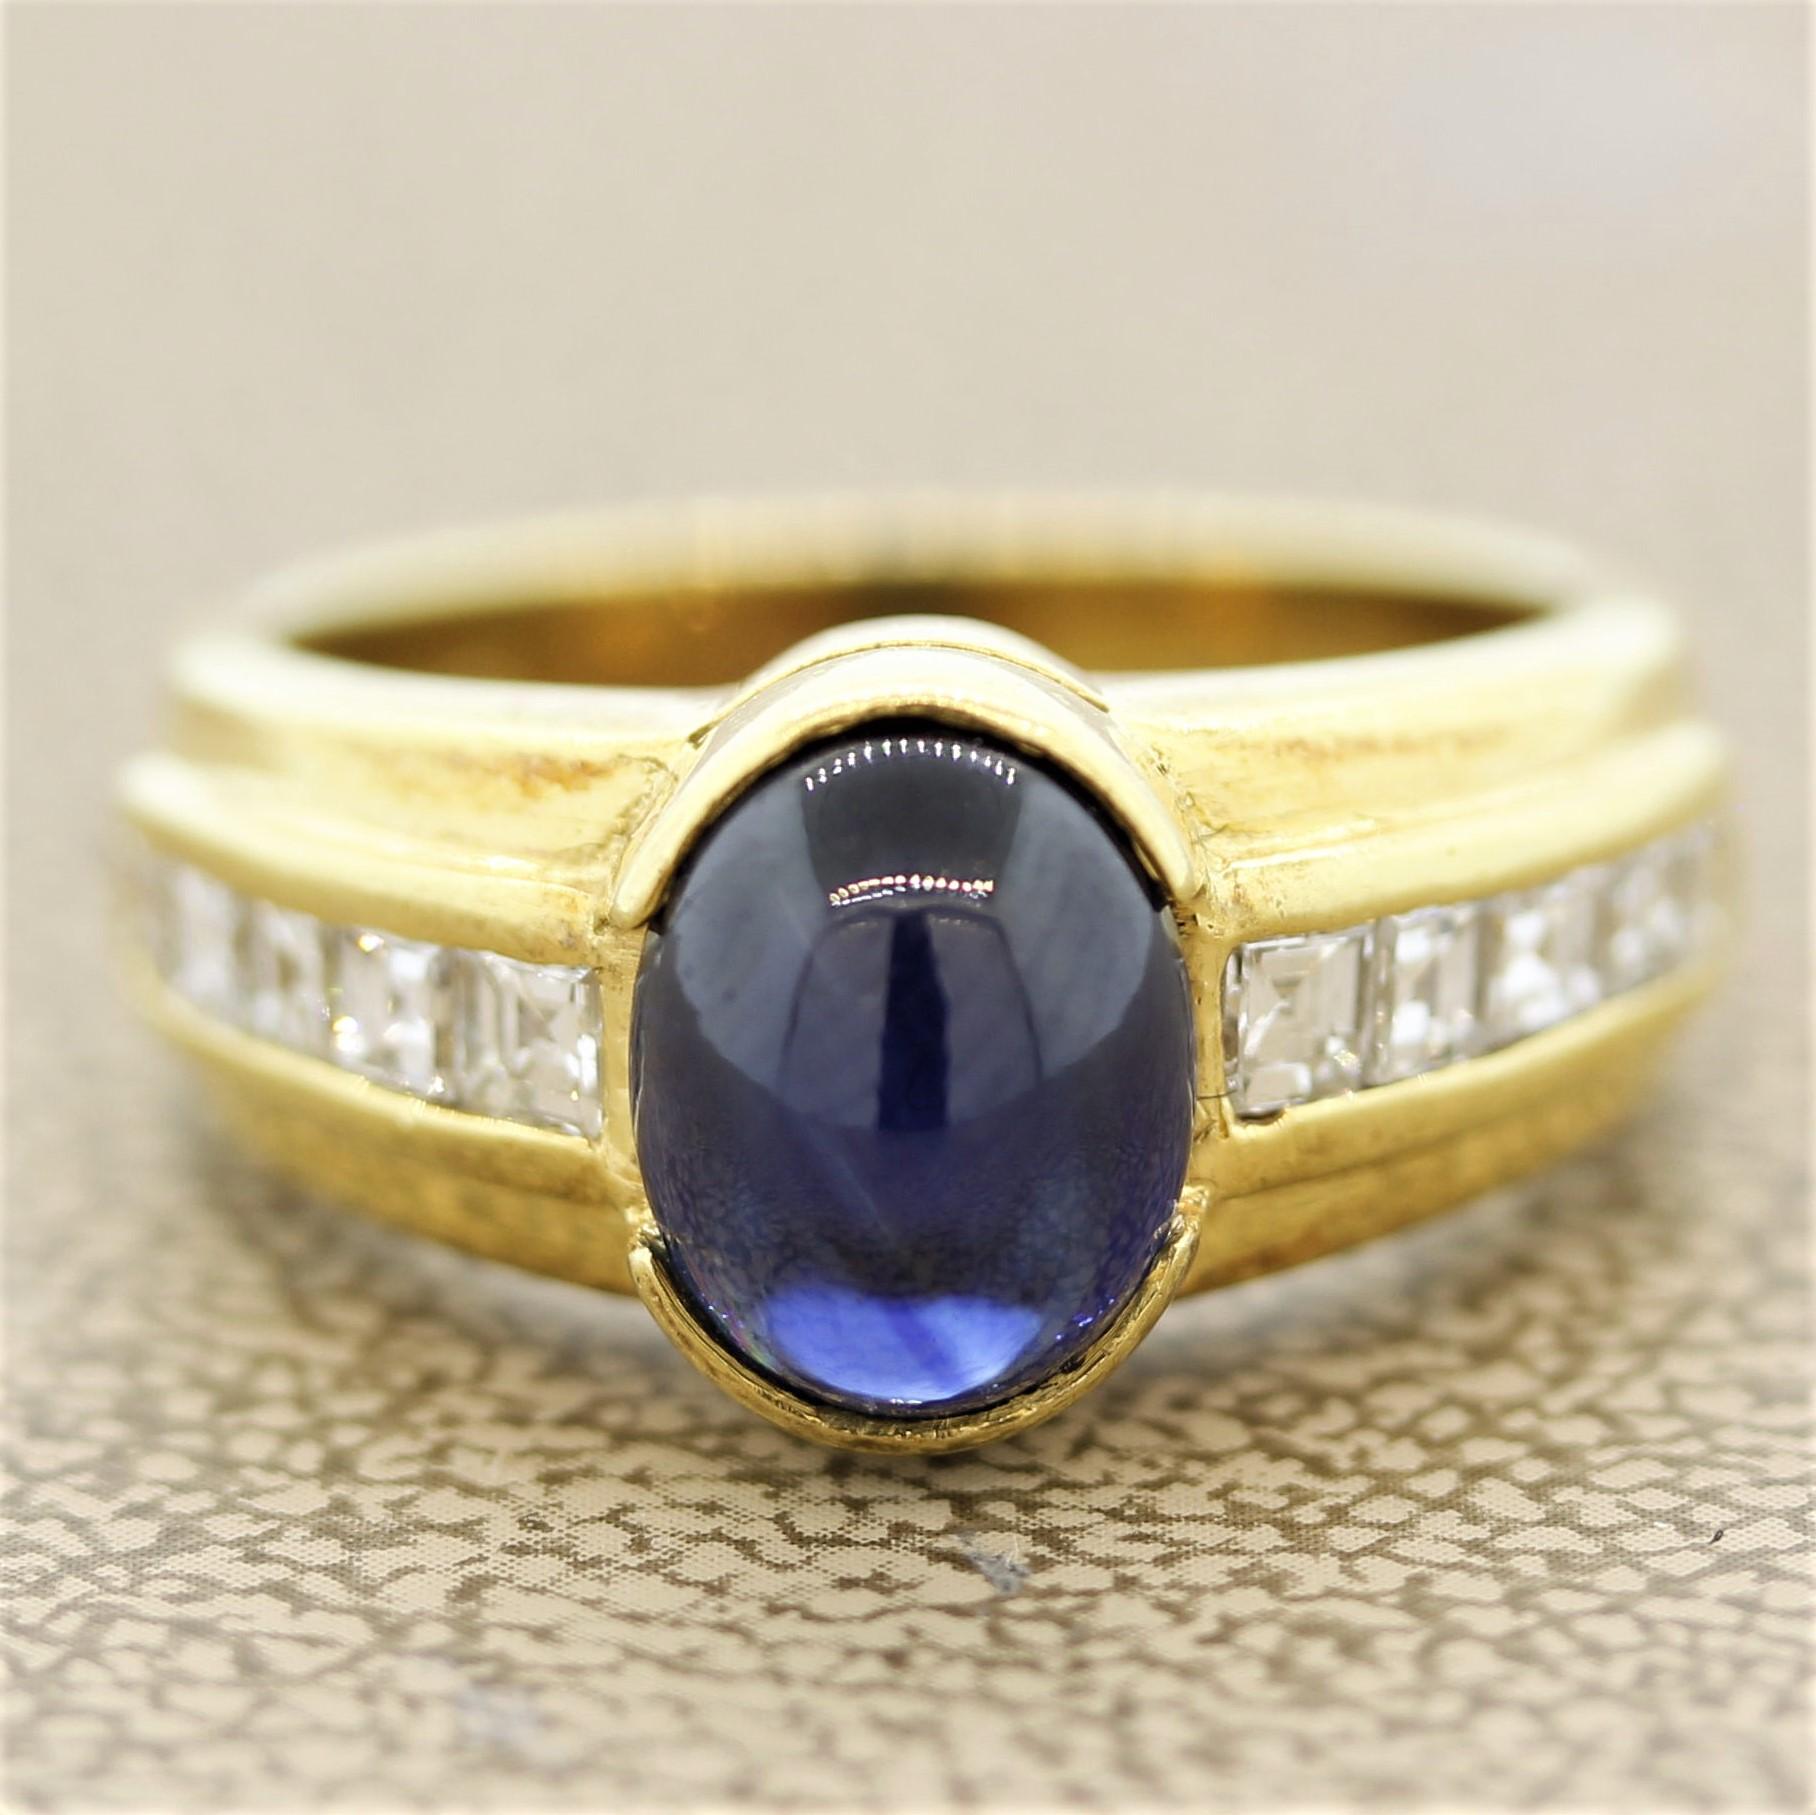 A lovely ring featuring a 3.07 carat cabochon sapphire with a vivid blue color. It is accented by 0.63 carats of fine asscher cut diamonds which are channel set on the sides of the ring. Made in 18k yellow gold, this gemstone ring will make a great